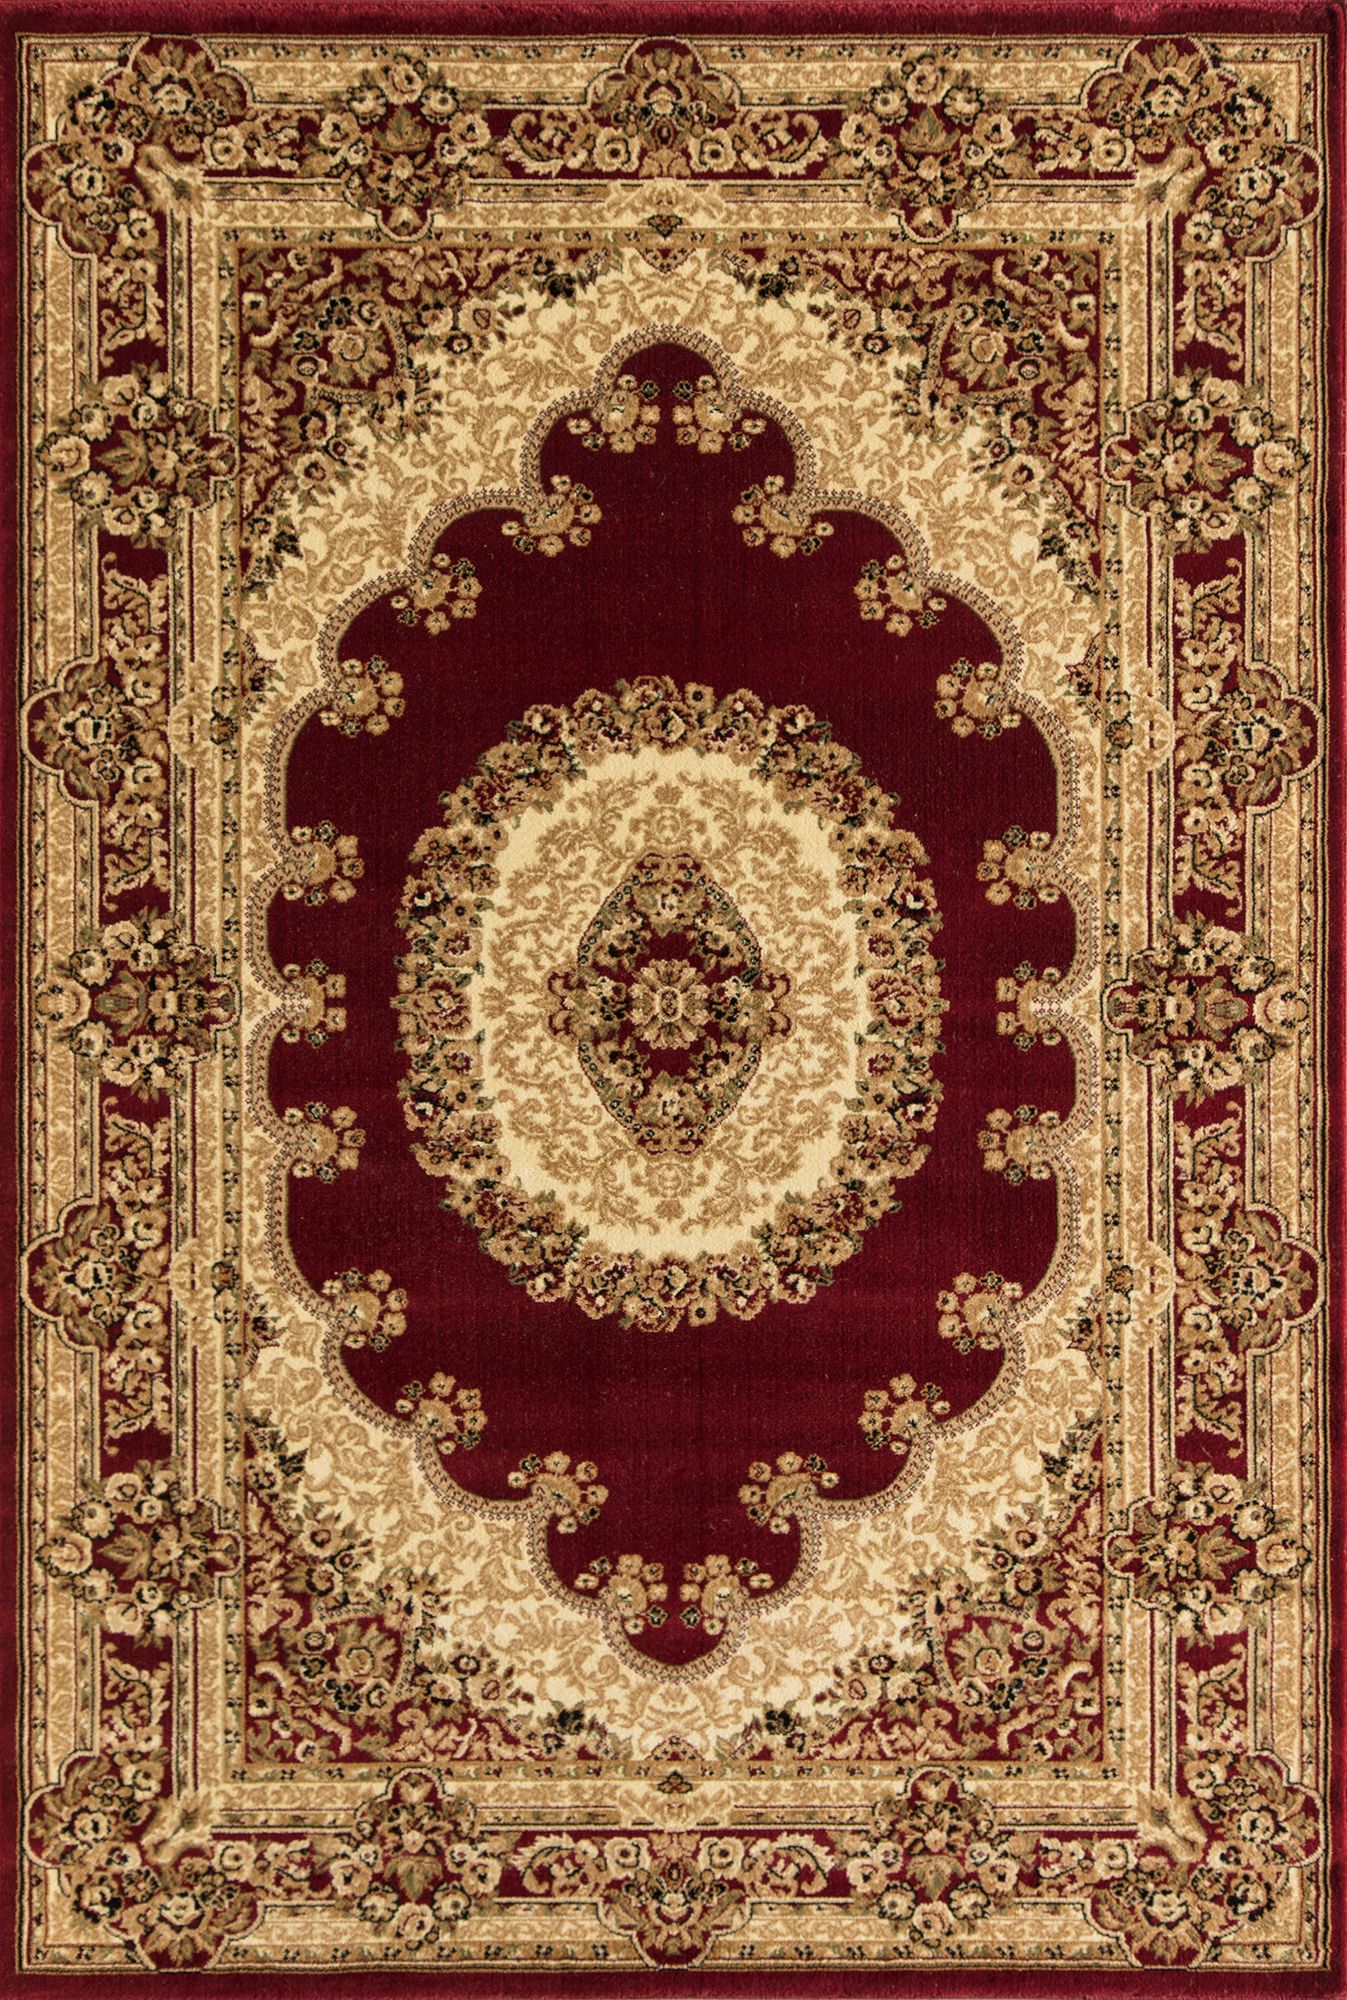 Rugs America Vista 807-RED Kerman Red Oriental Traditional Red Area Rug, 7'10"x10'10" - image 4 of 5